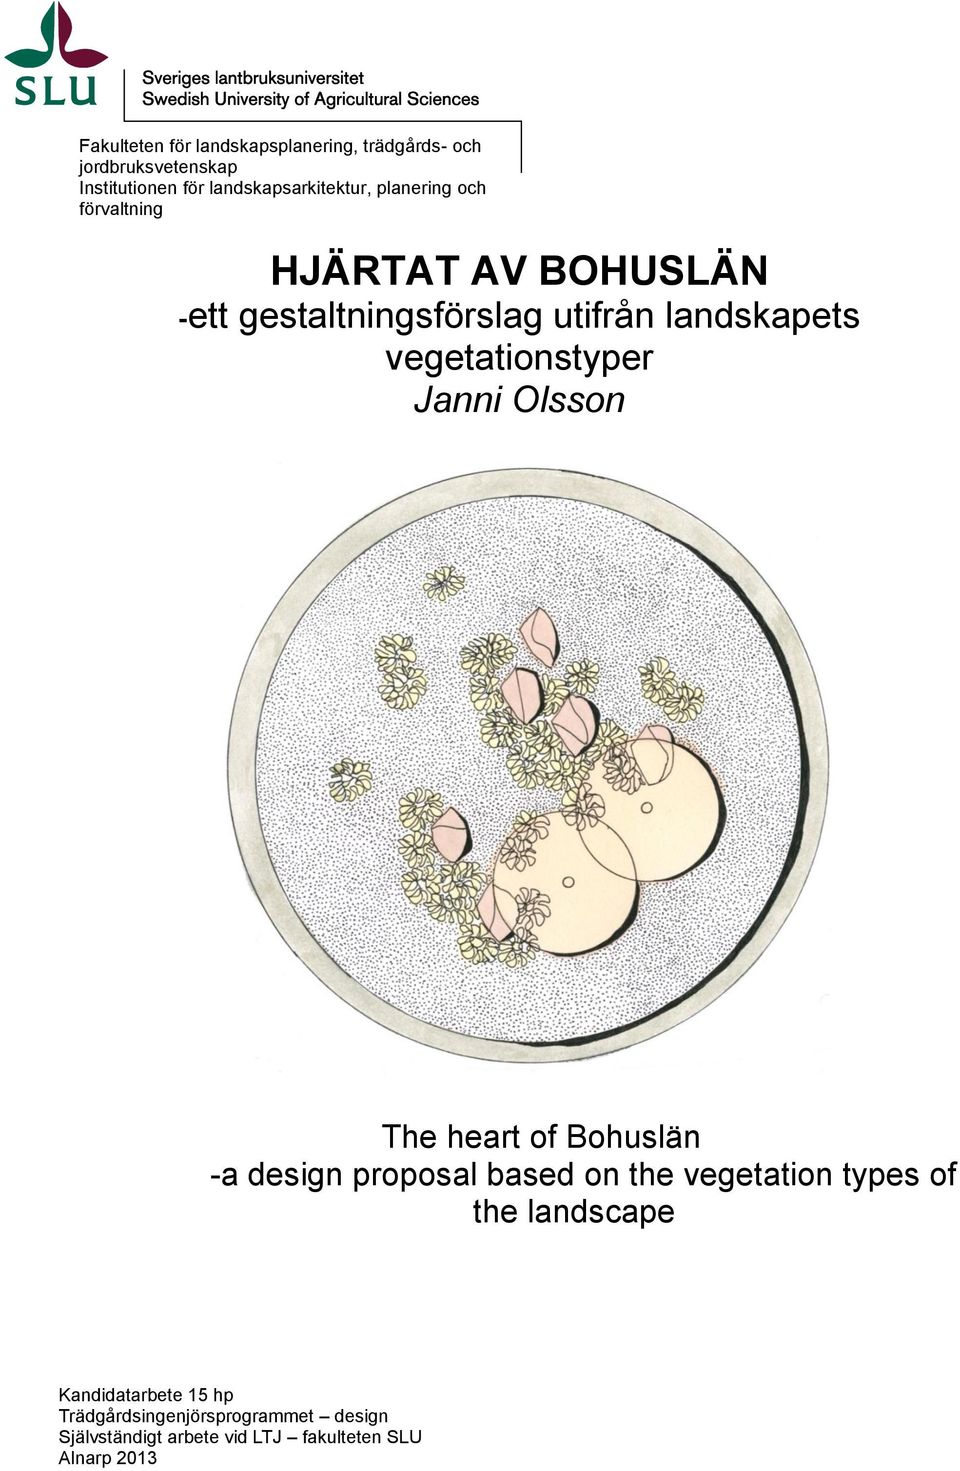 Janni Olsson The heart of Bohuslän -a design proposal based on the vegetation types of the landscape